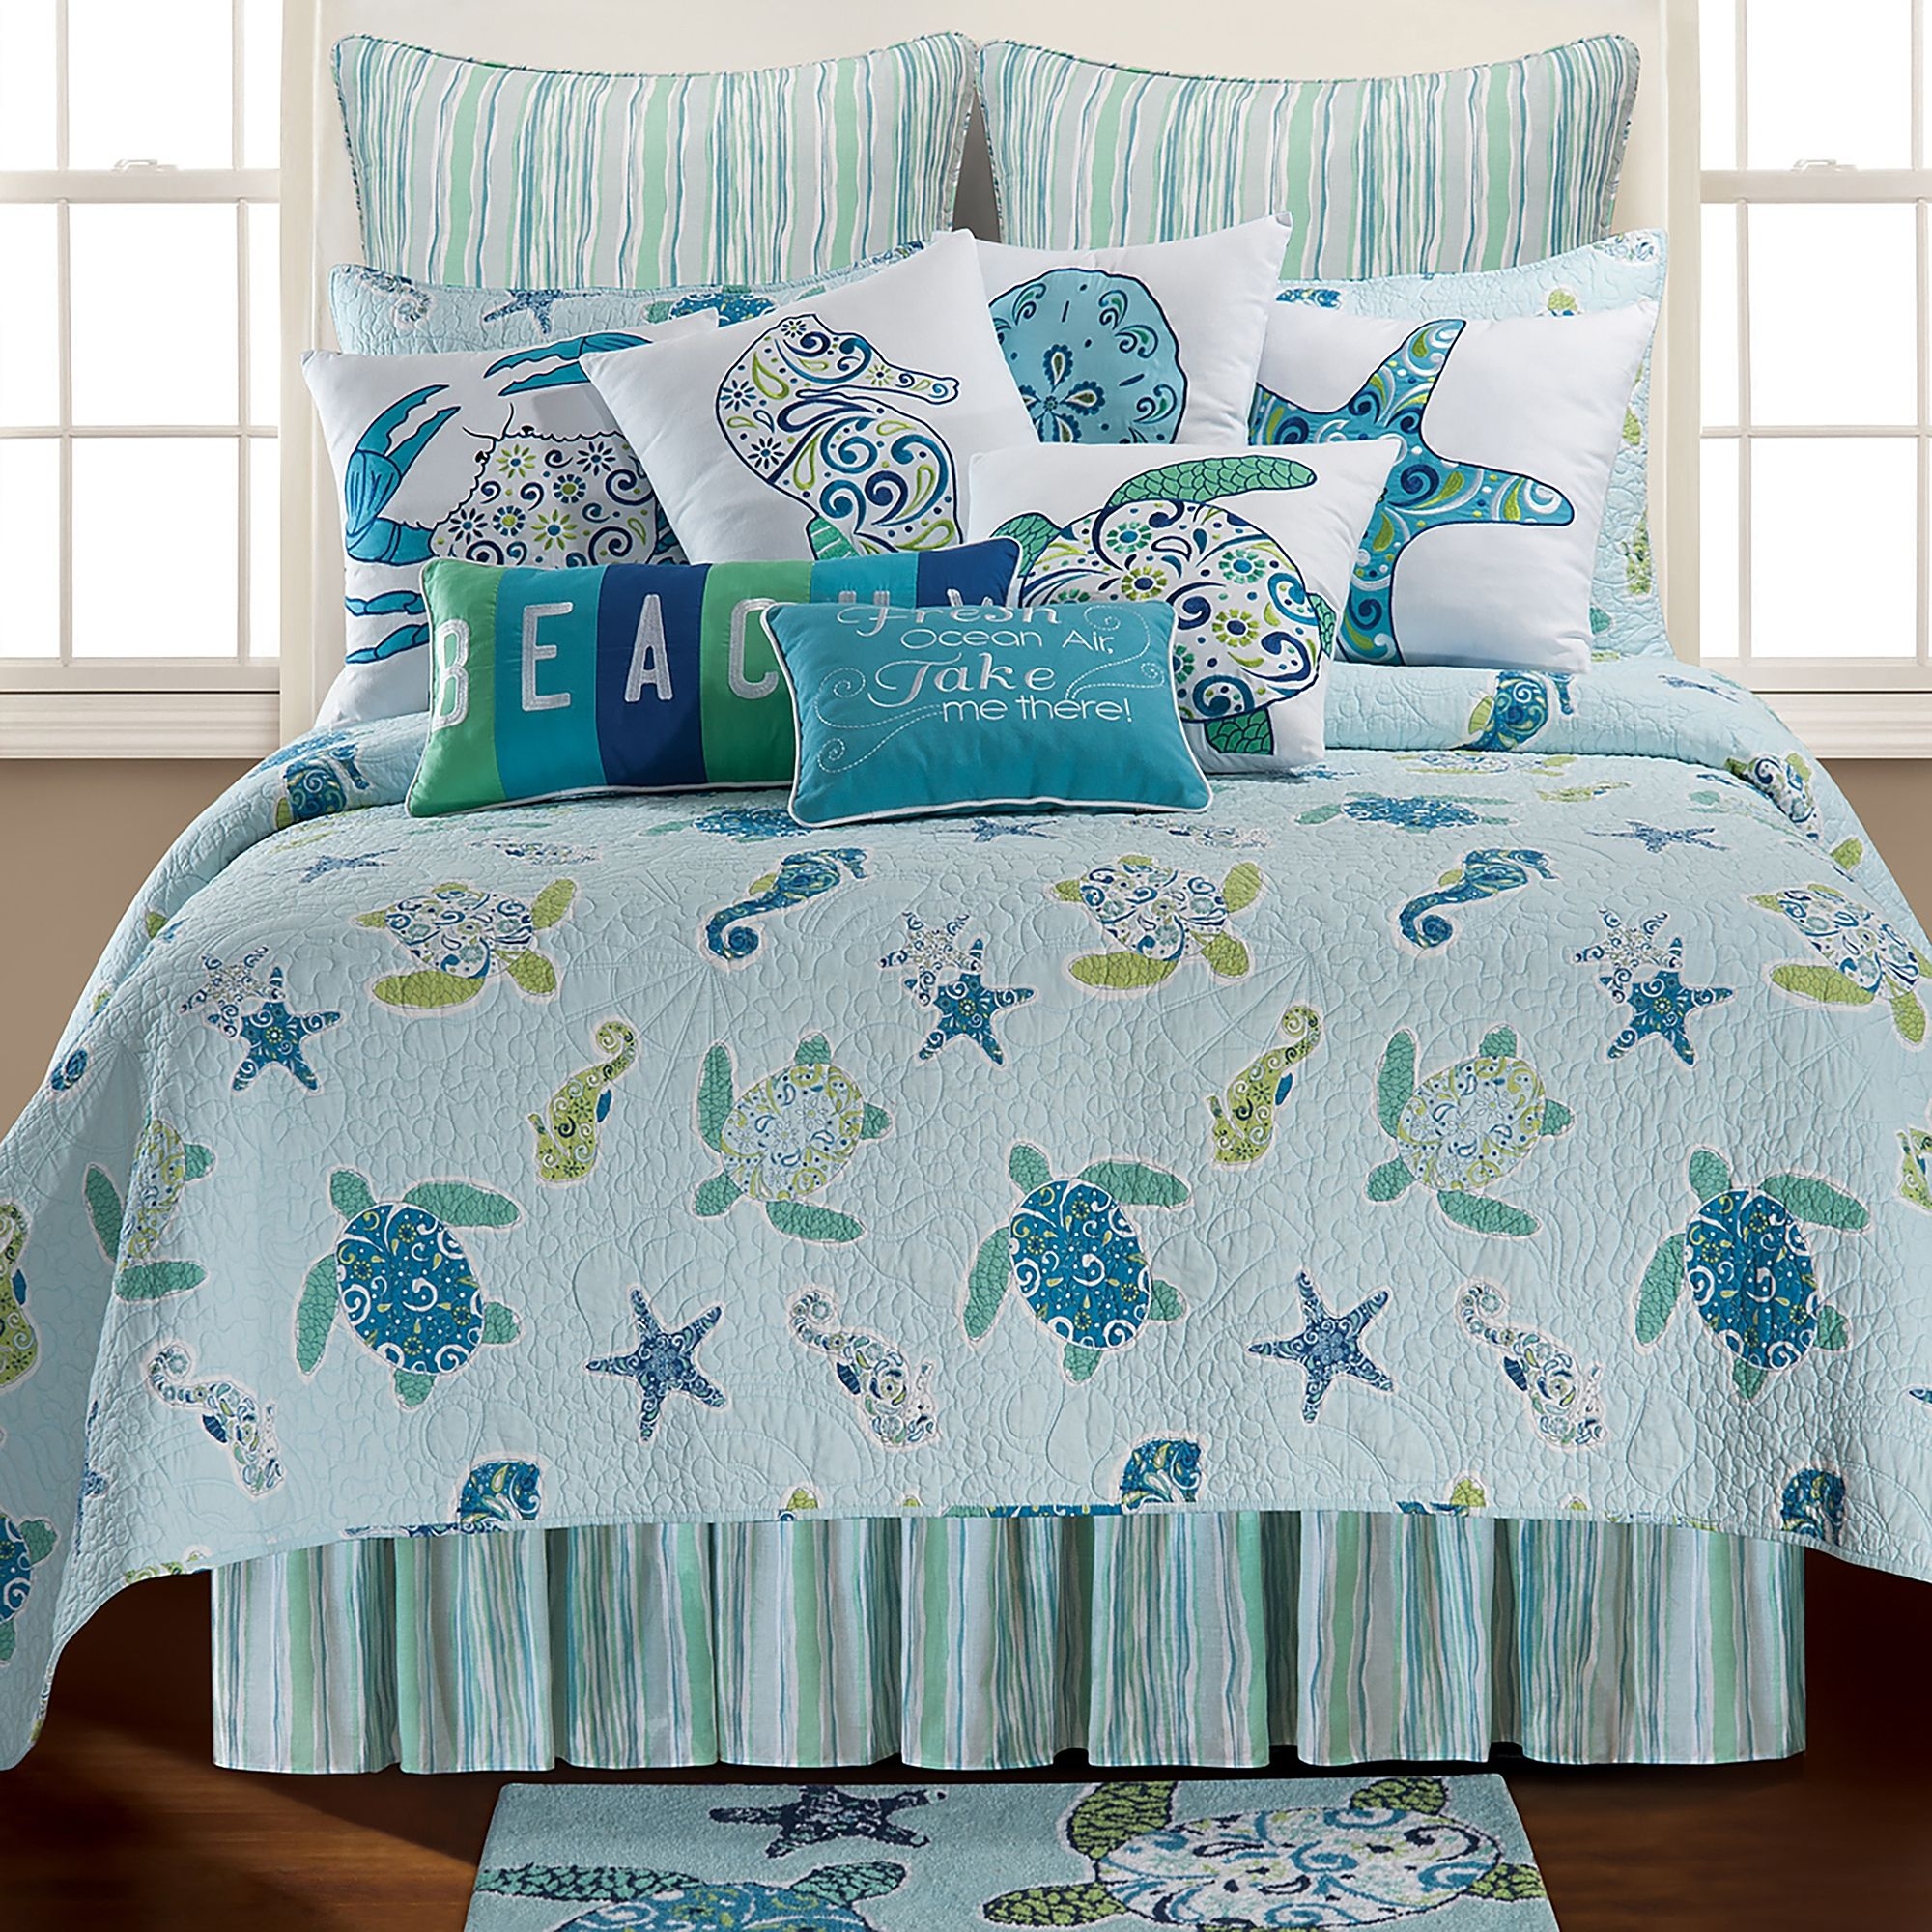 Coastal themed quilts 5